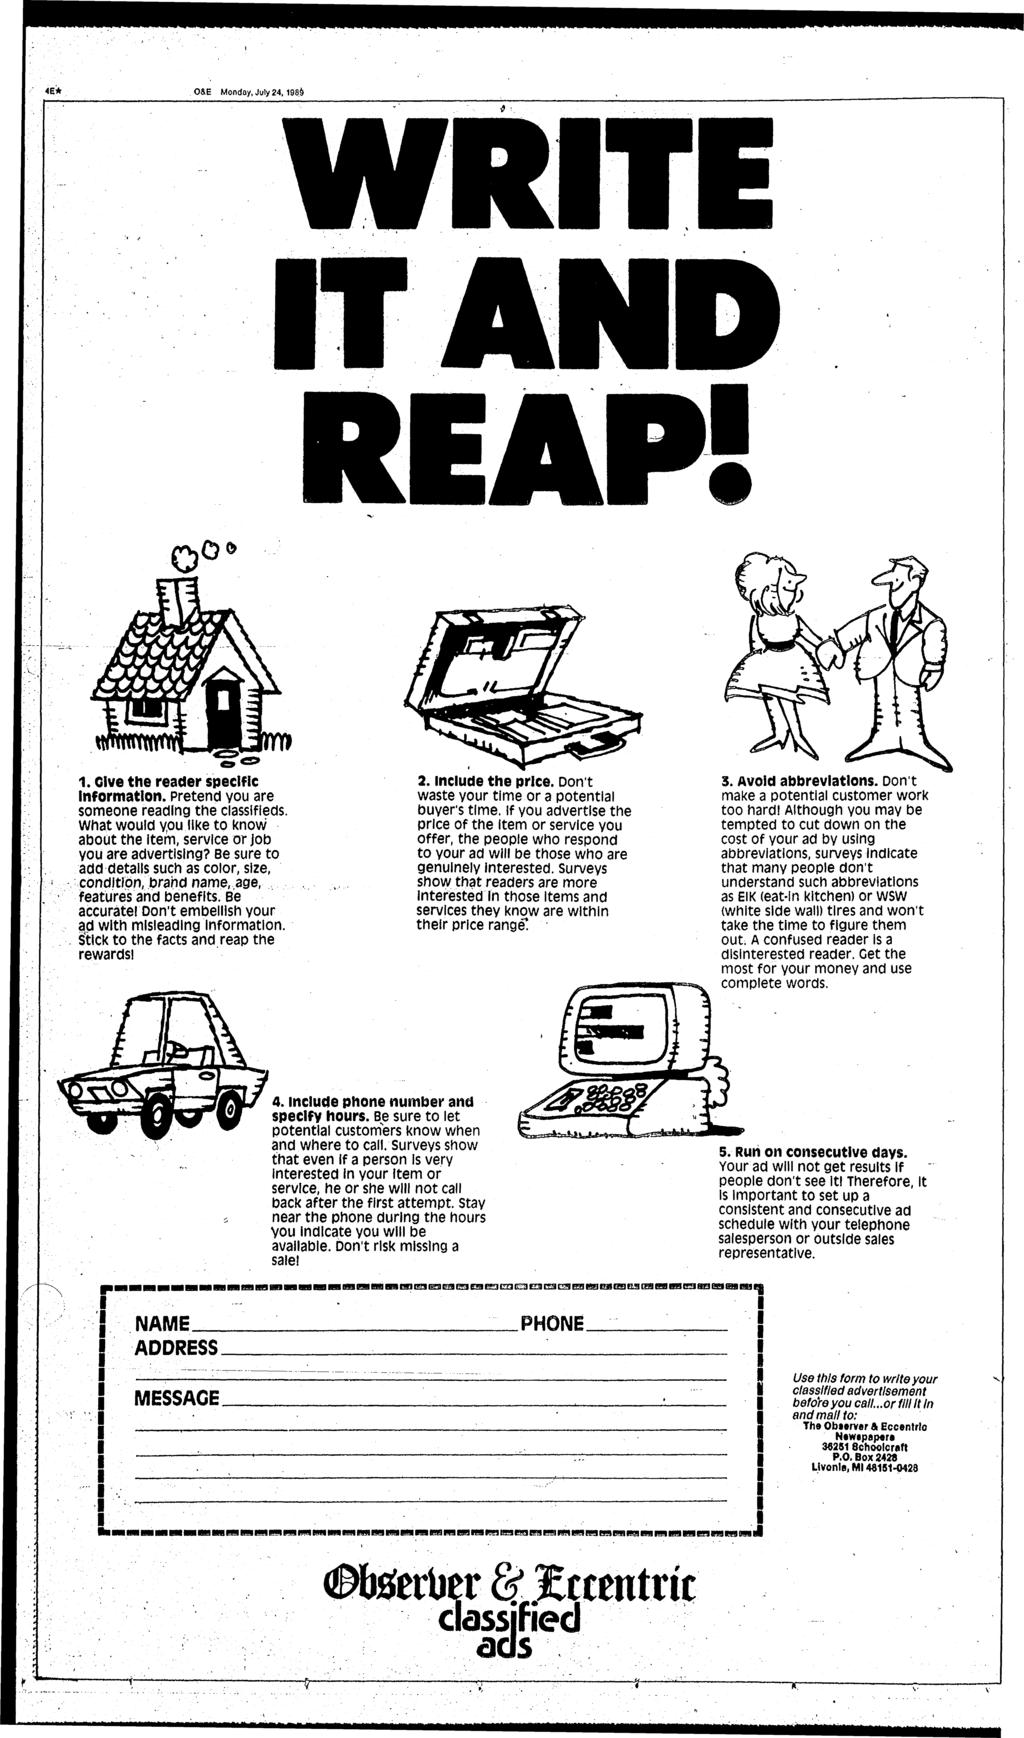 4E* O&E Monday, July 24,198 -W' ' 1. Gve the reader specfc nformaton. Pretend you are someone readng the classfeds. What would you.lke to know about the tem, servce or job you are advertsng?